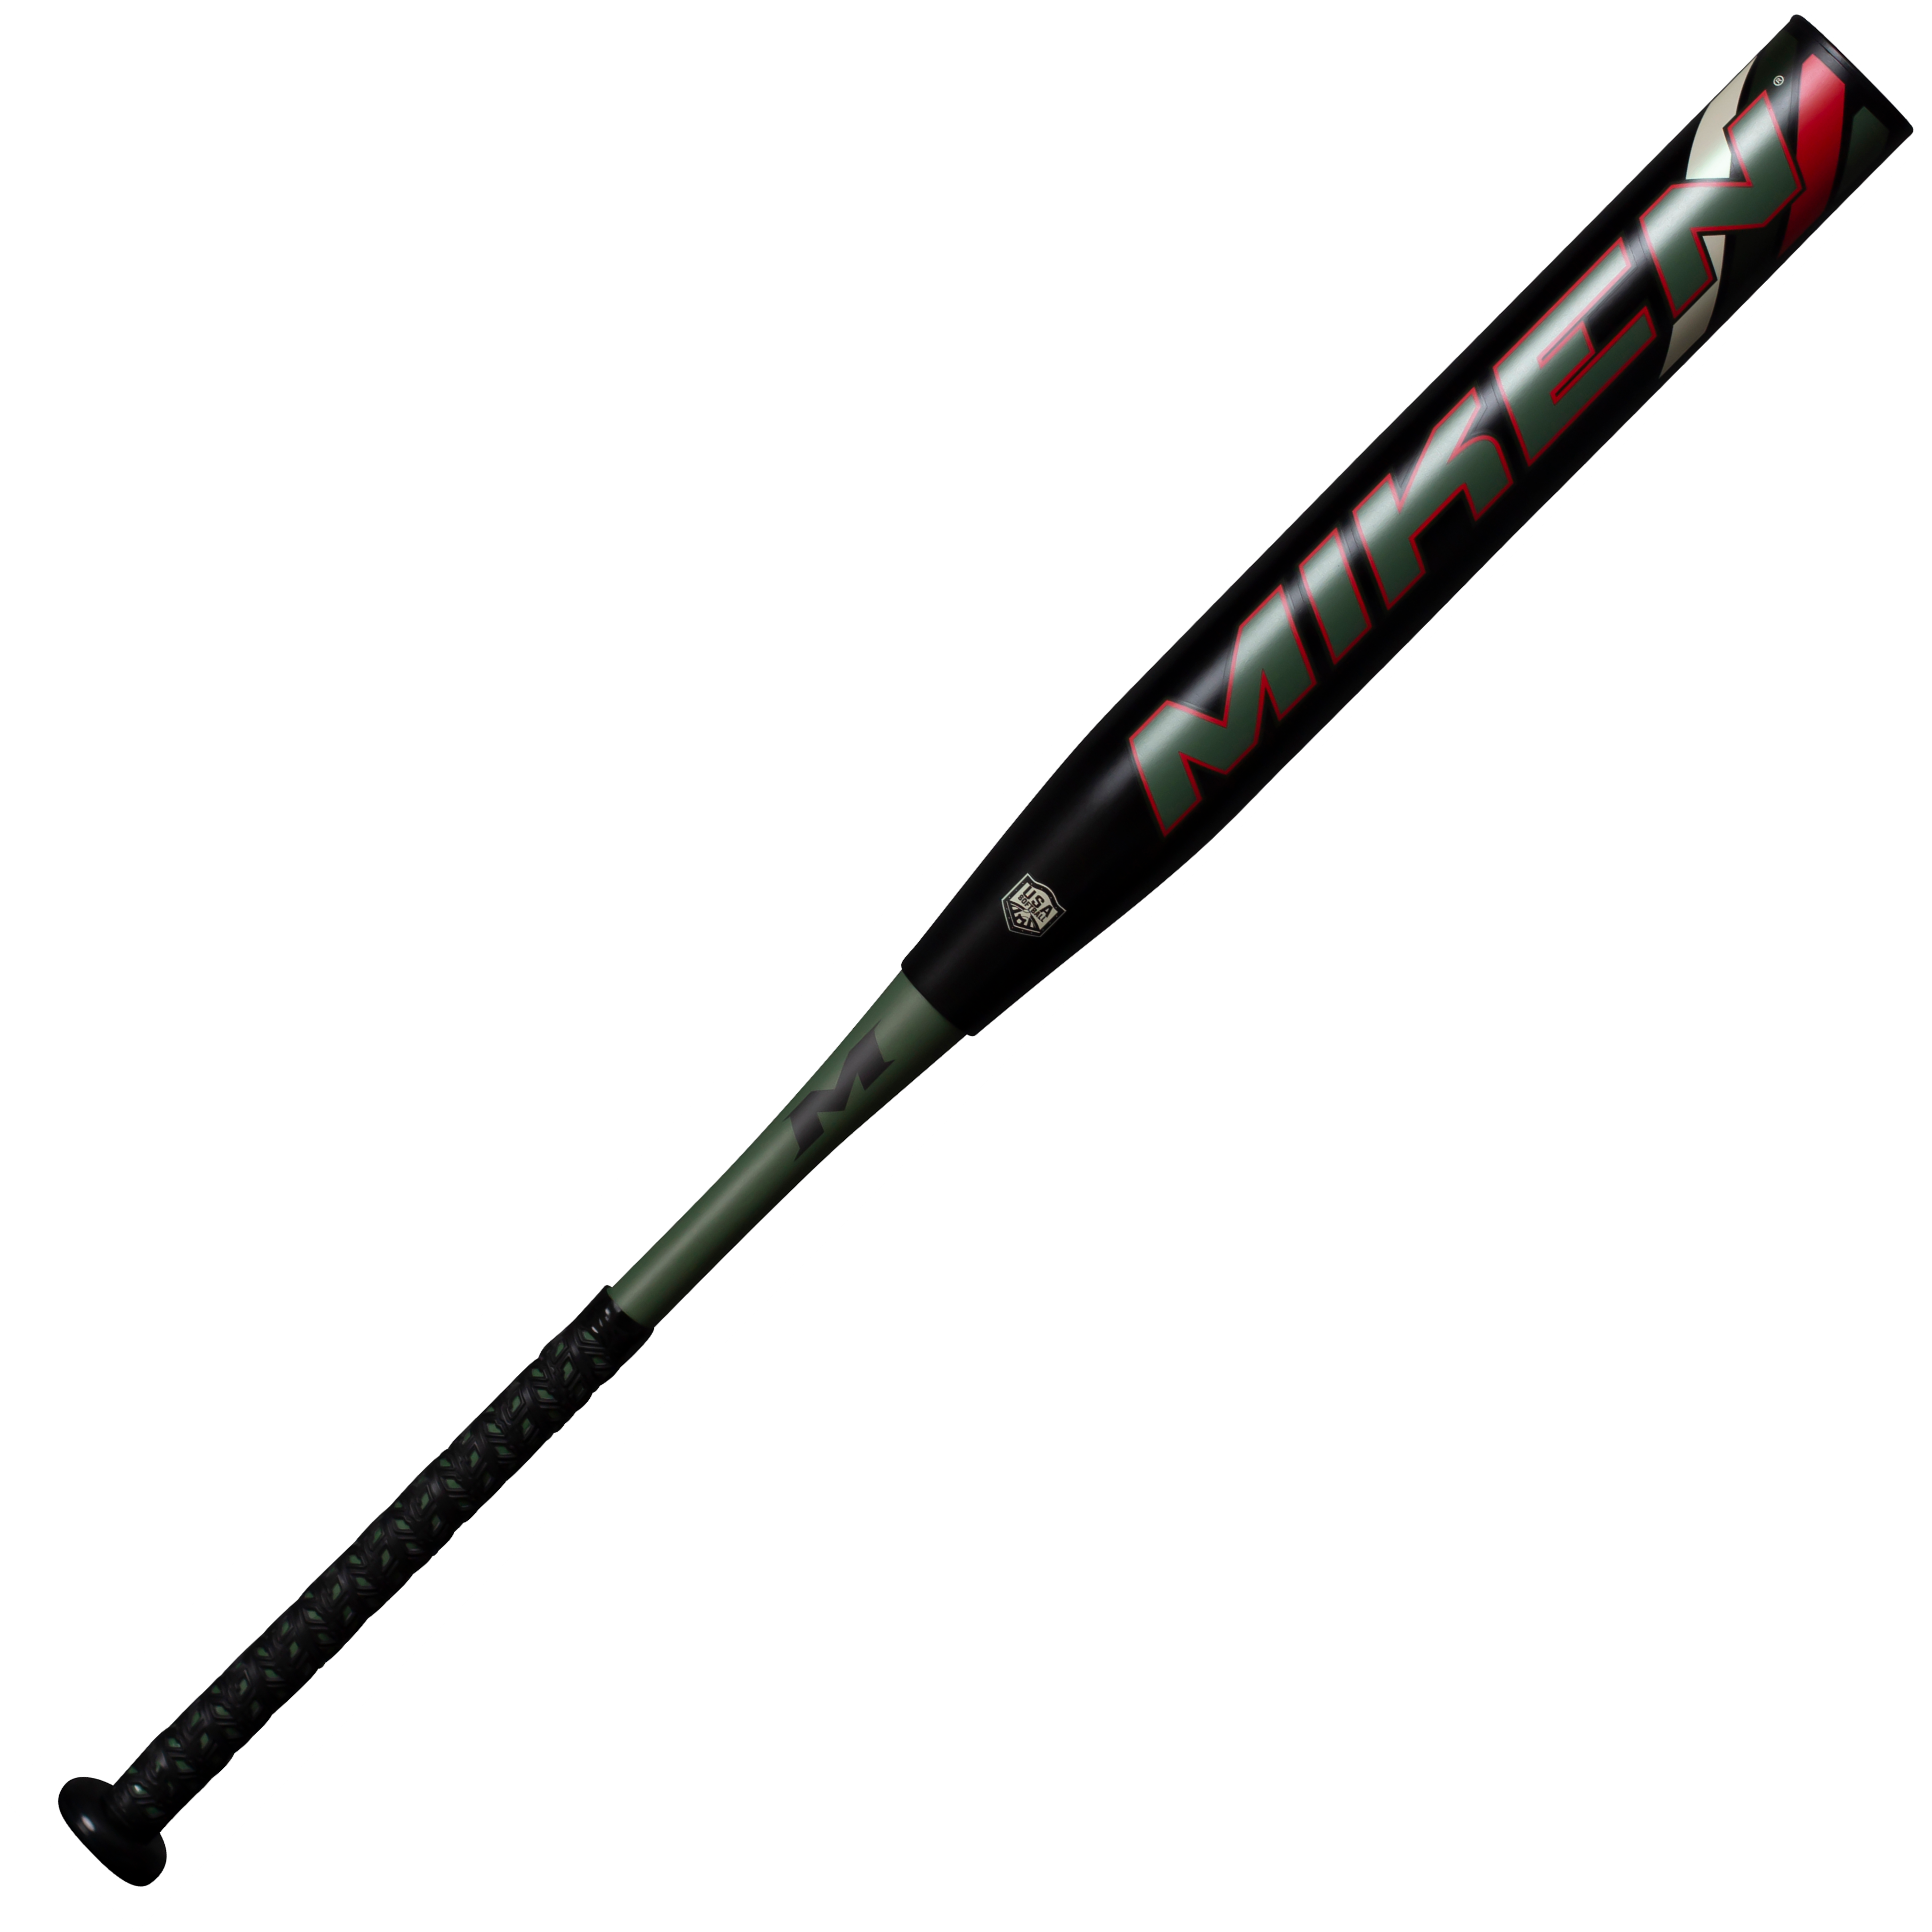 miken-dc-41-supermax-asa-14-inch-slowpitch-softball-bat-34-inch-26-oz MDC20A-3-26 Miken  The ASA 2020 Limited Edition Miken DC-41 Slow Pitch Softball Bat